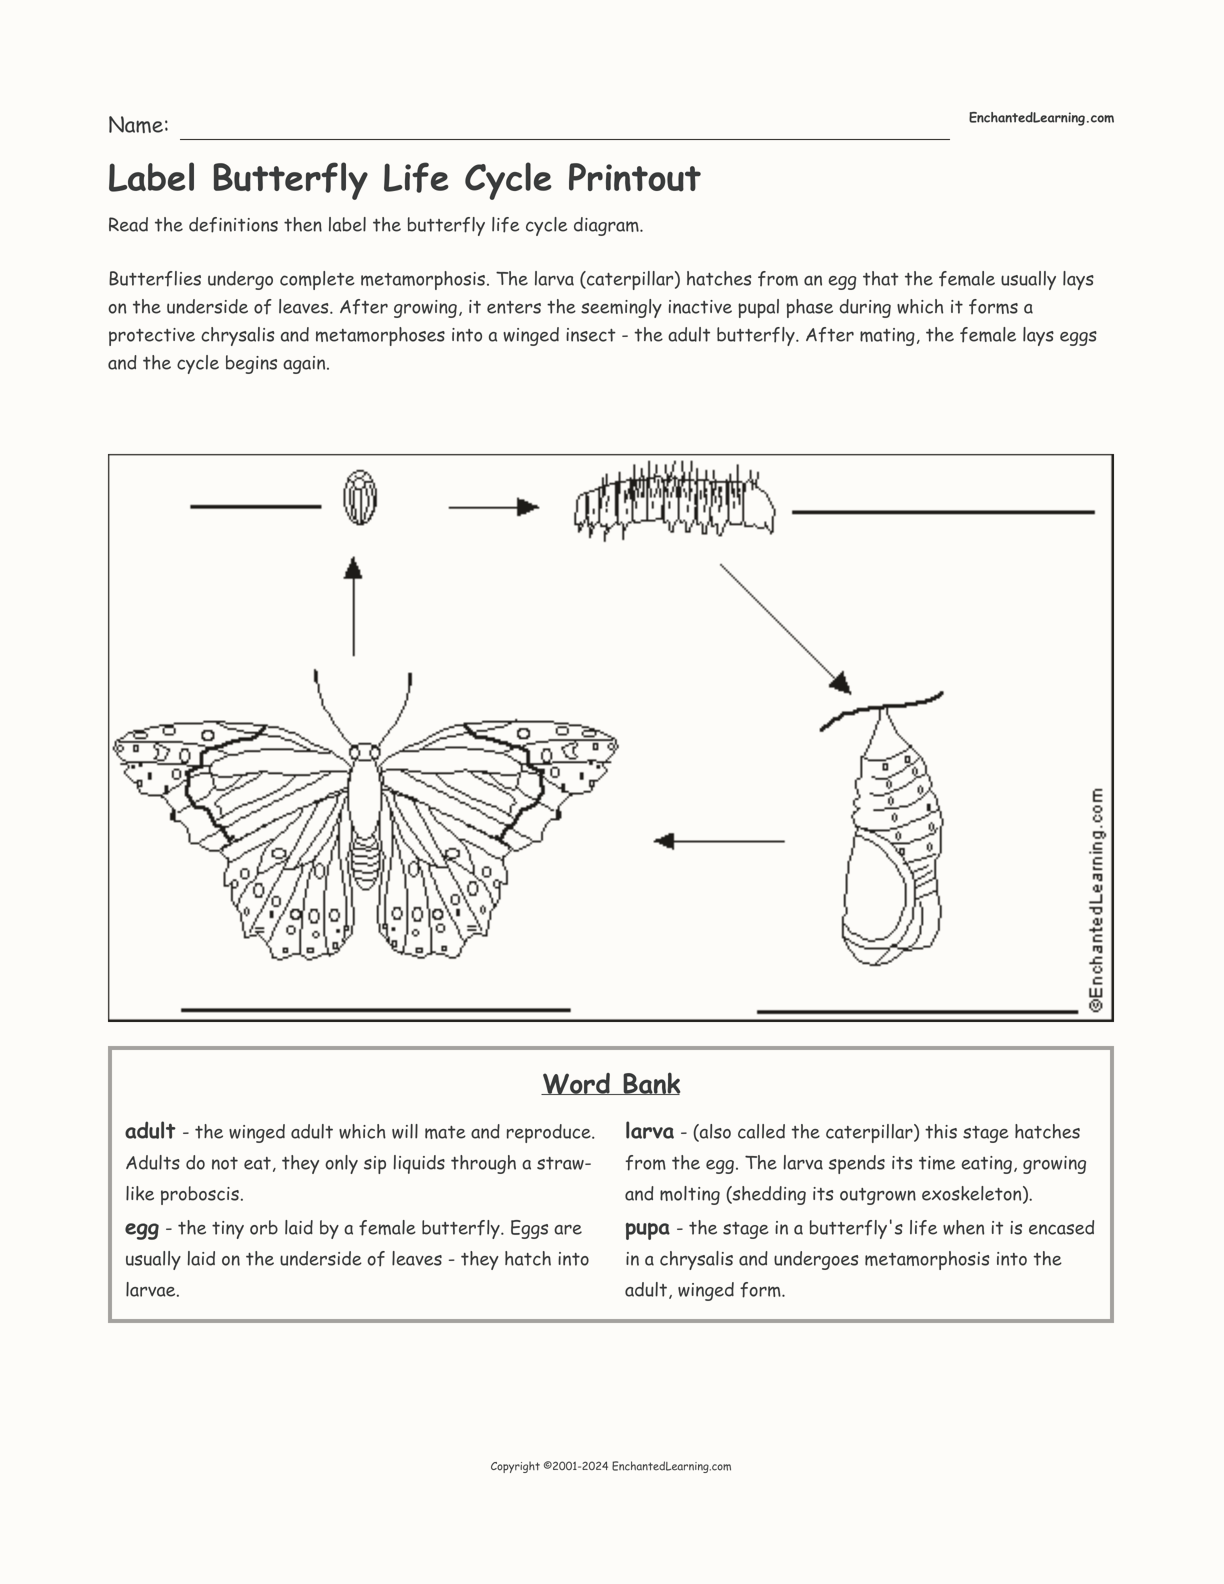 Label Butterfly Life Cycle Printout interactive worksheet page 1